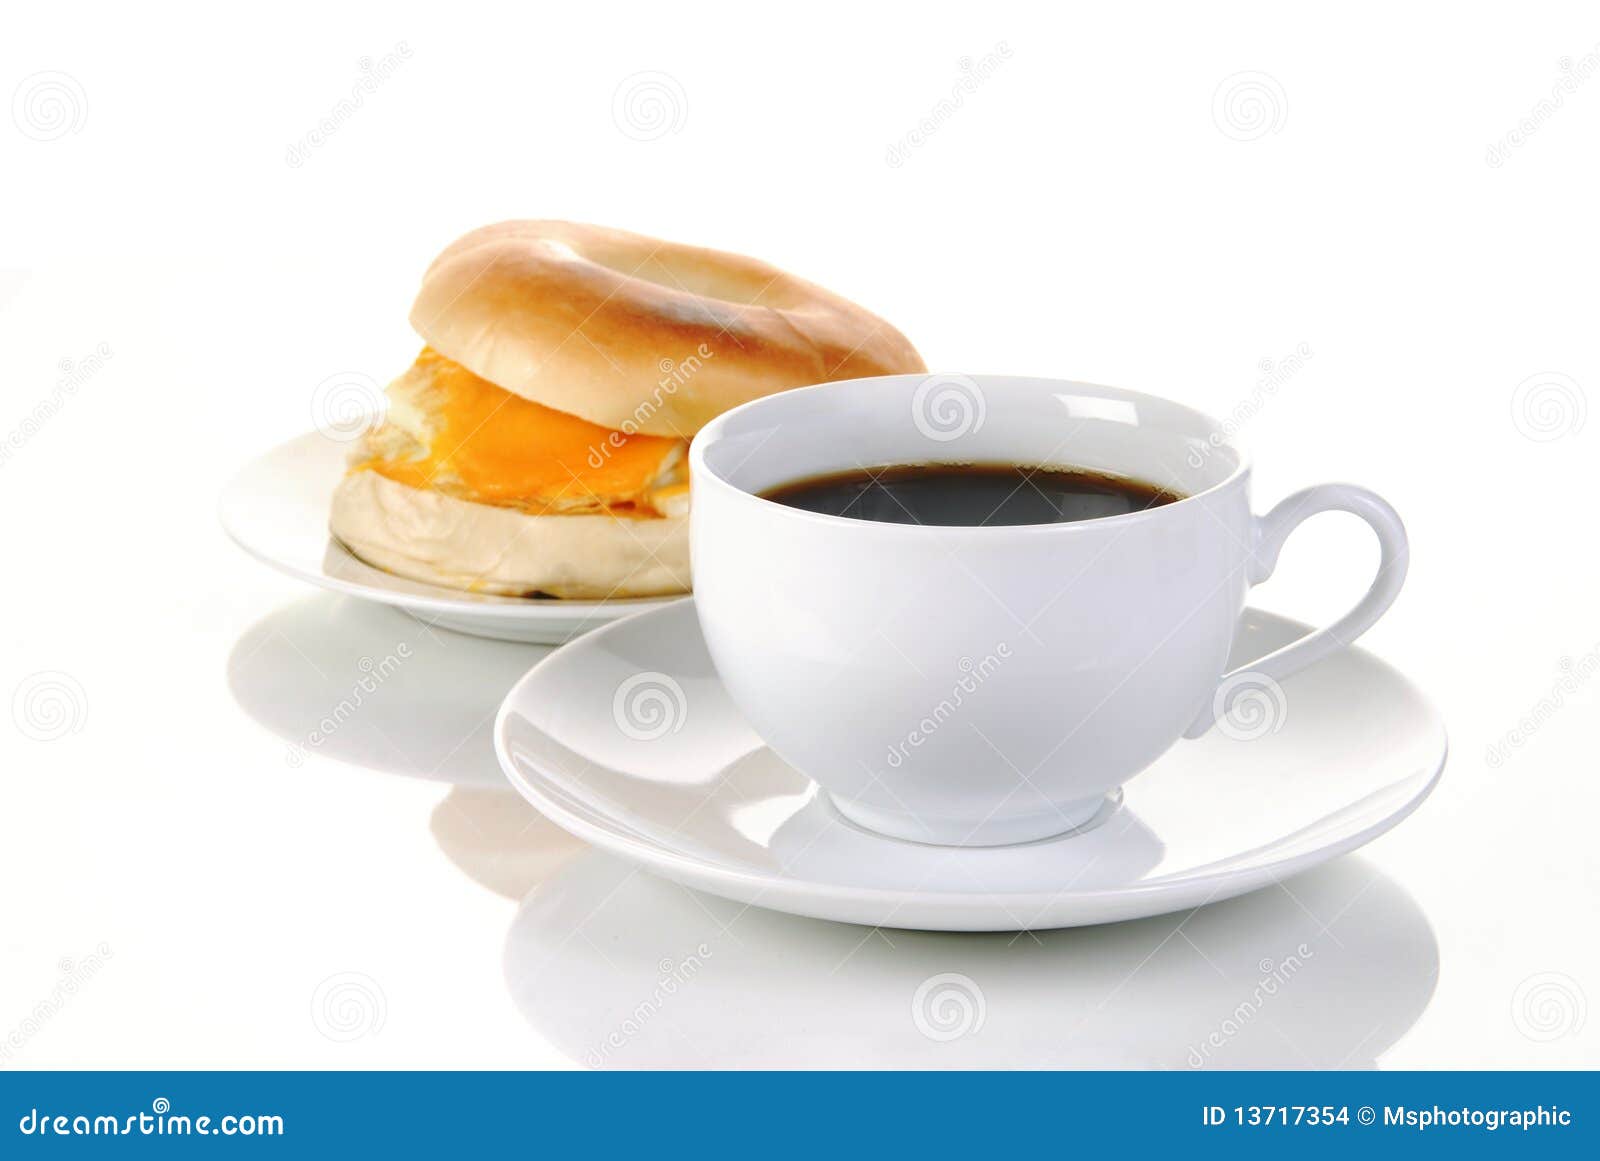 clipart bagels and coffee - photo #50